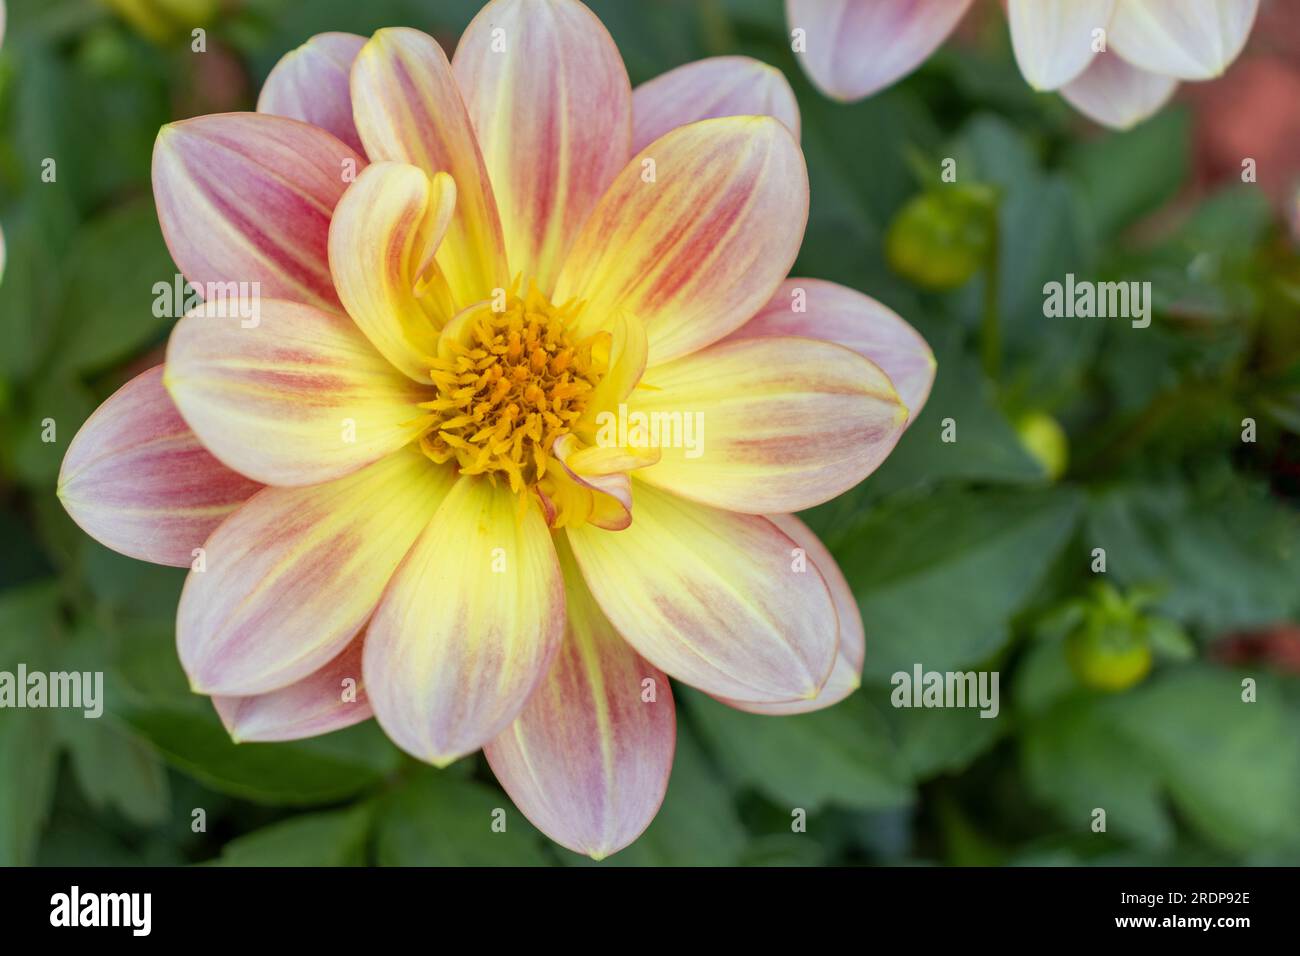 Vibrant yellow and pink dahlia flower with circular petals - close-up view from above with green leaves and flowers in blurred background Stock Photo